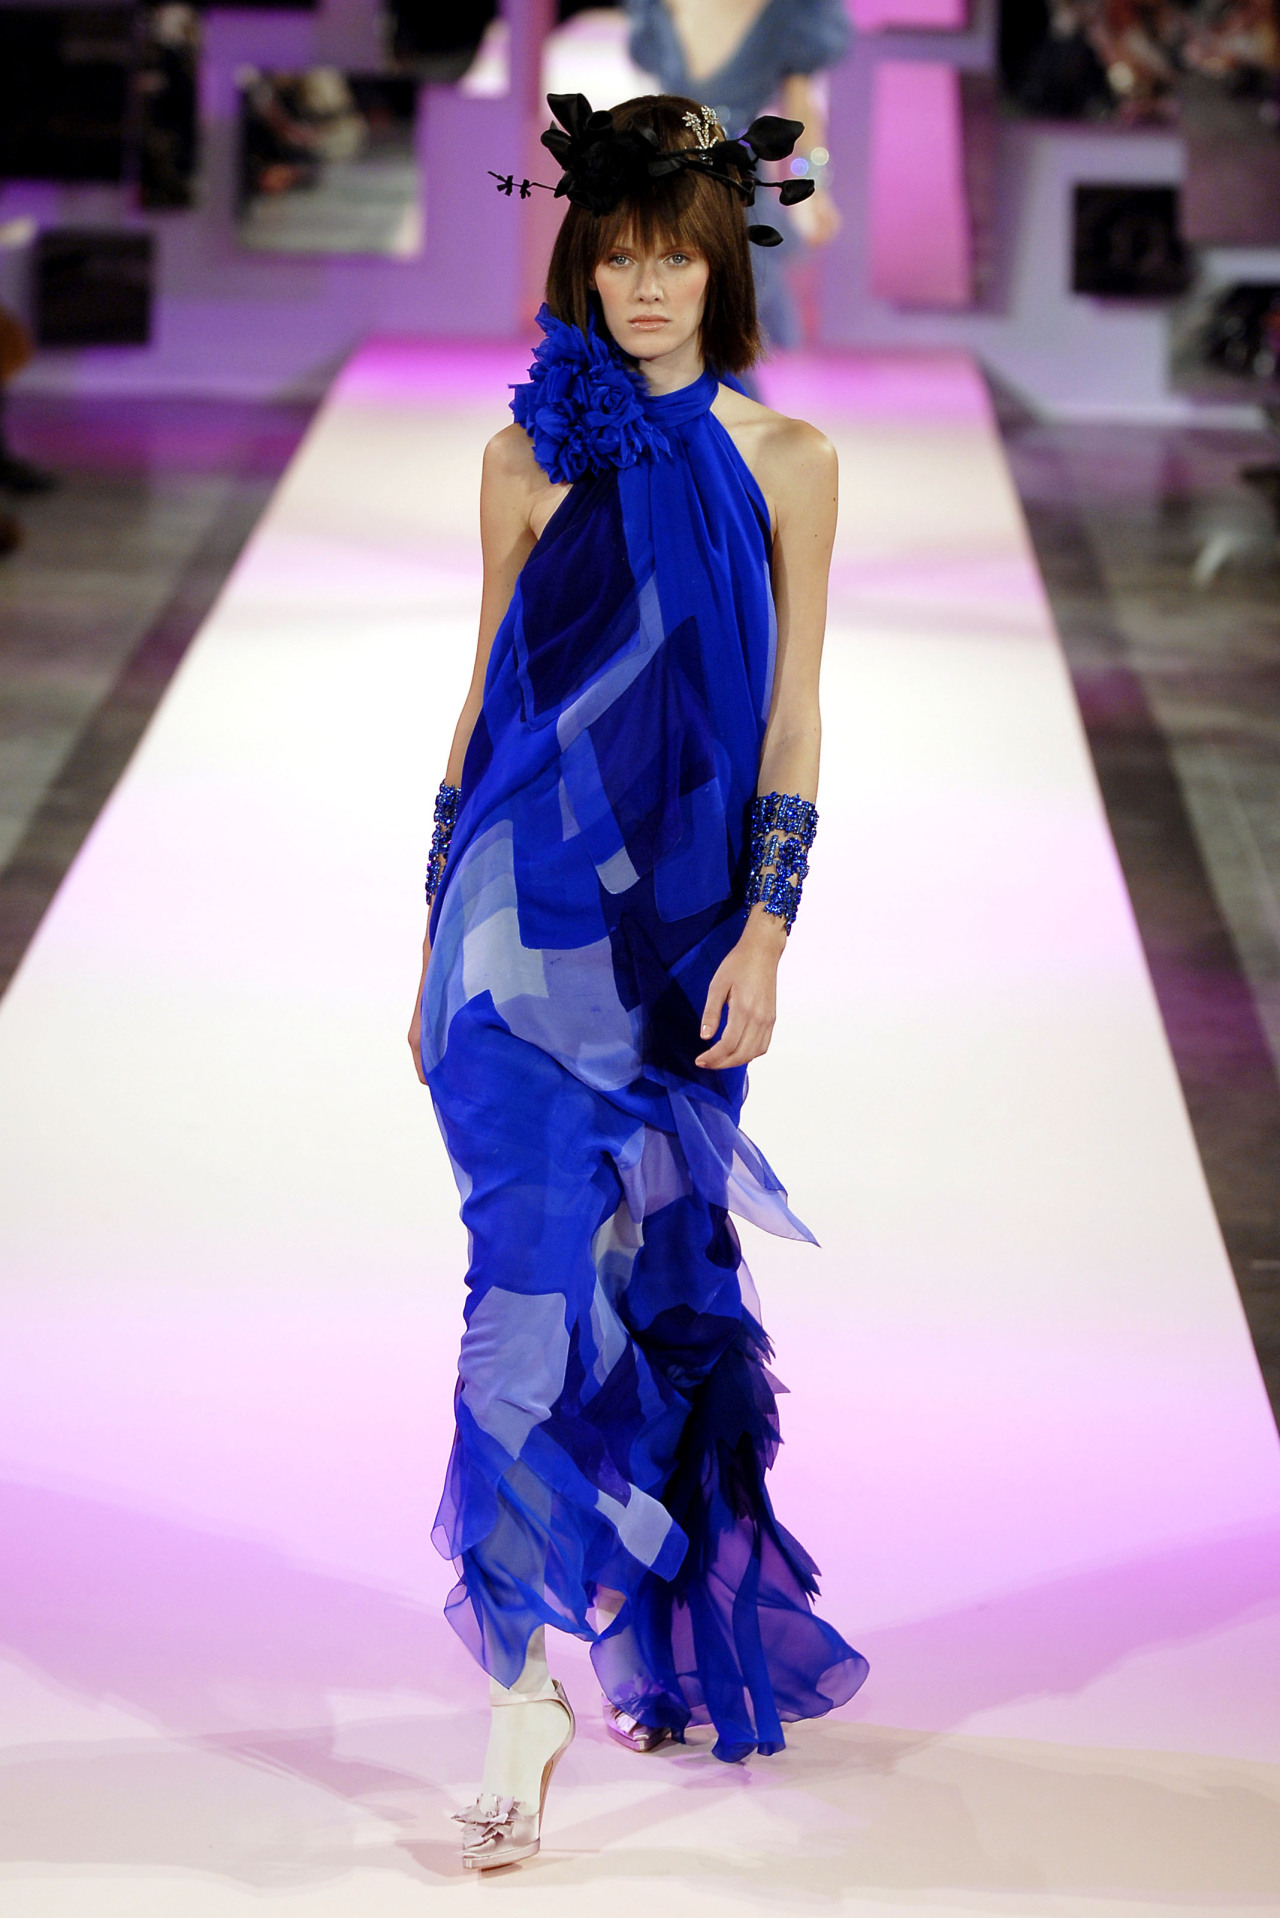 Romina Lanaro at Christian Lacroix Haute Couture... - Chic As F**k